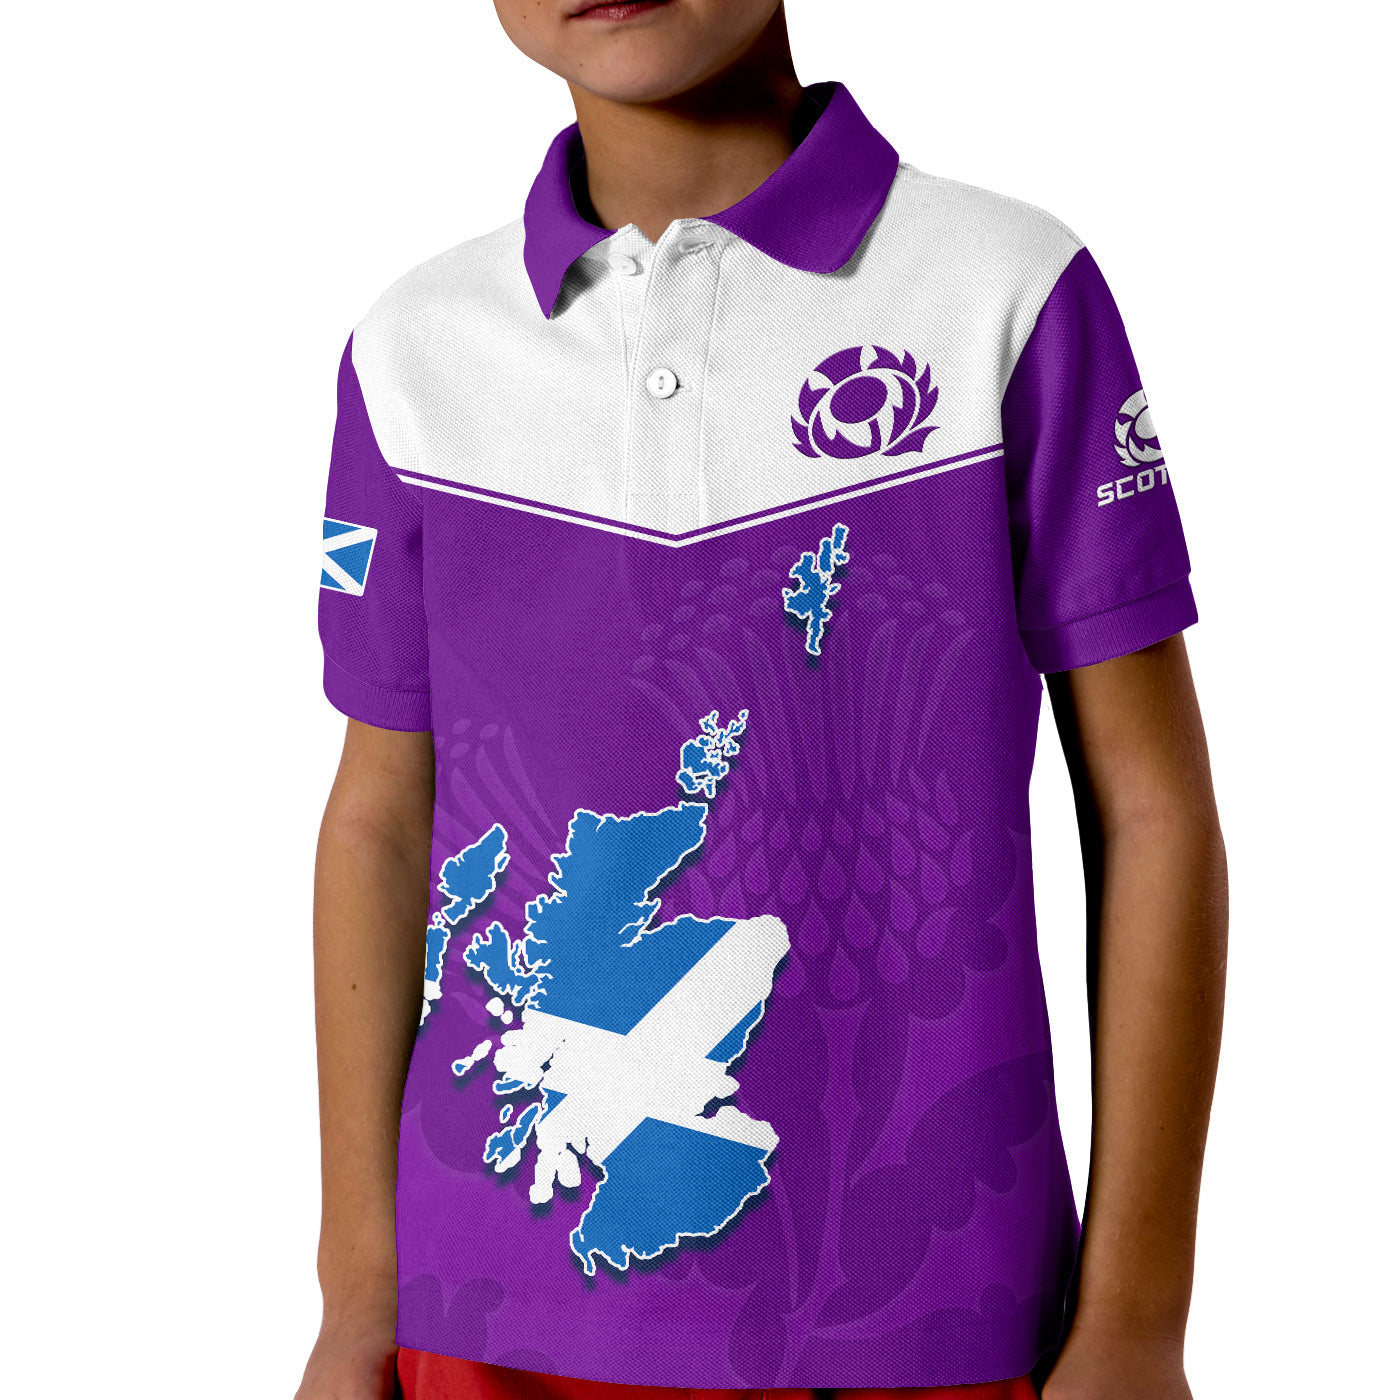 custom-personalised-scottish-rugby-polo-shirt-map-of-scotland-thistle-purple-version-lt14